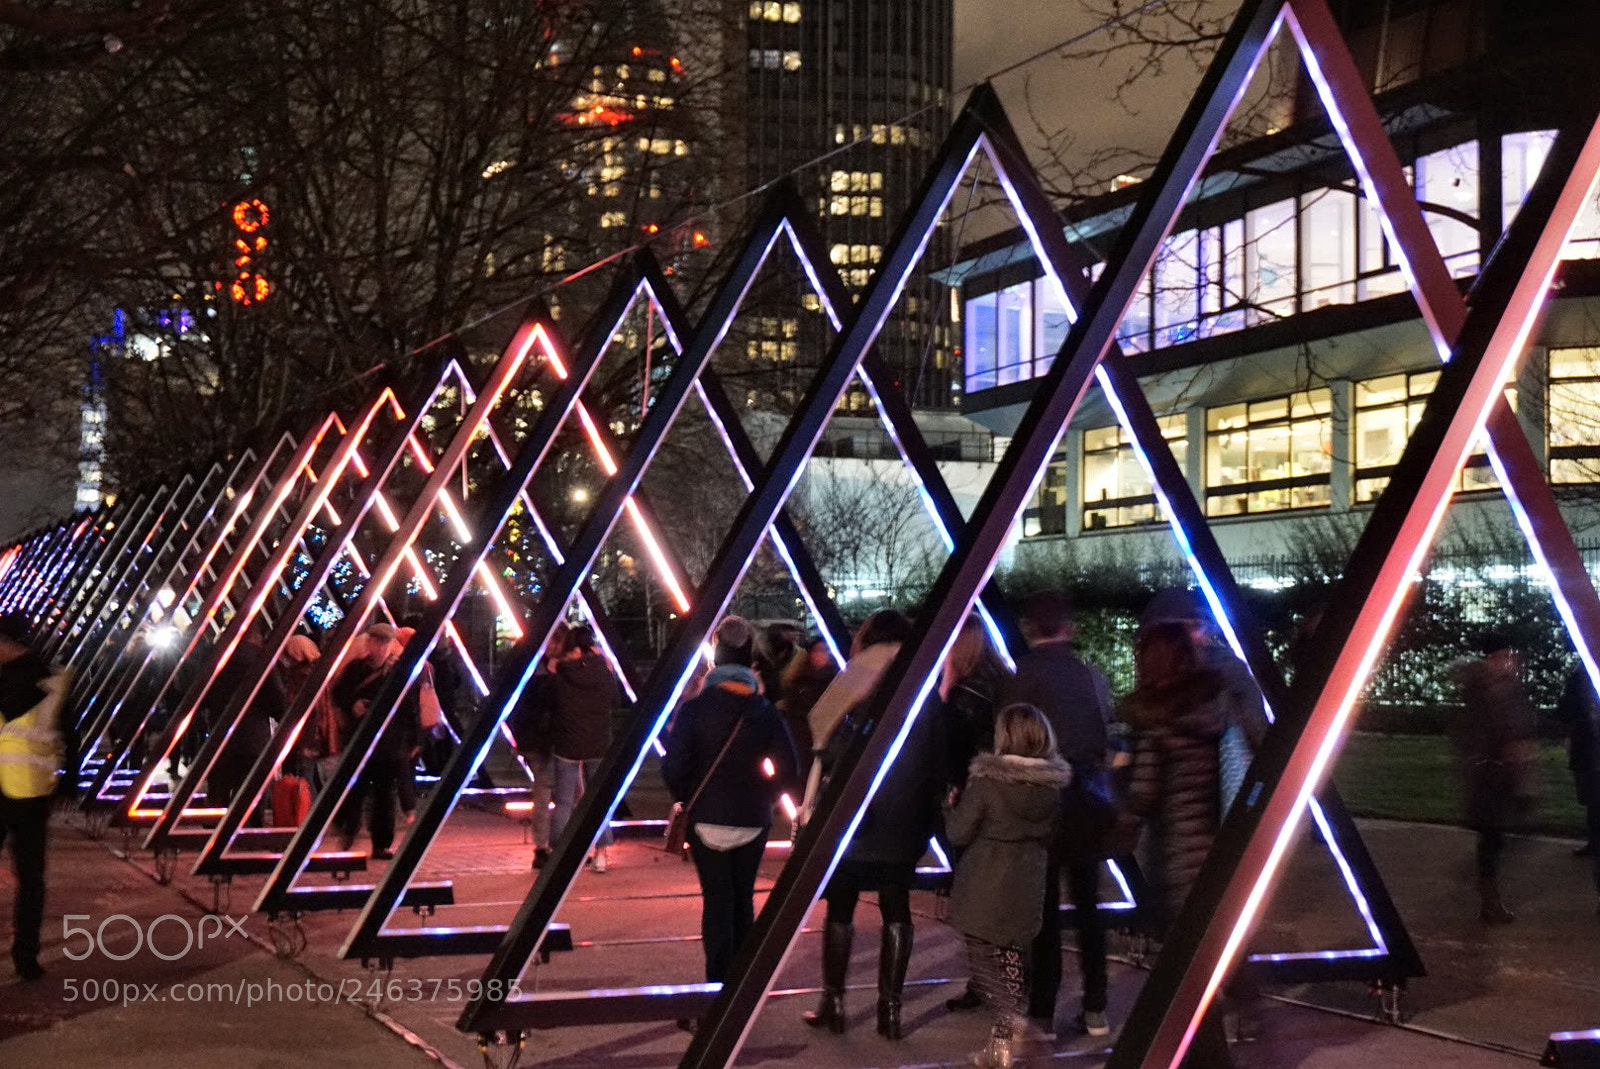 Sony a6000 sample photo. Triangles of lights photography